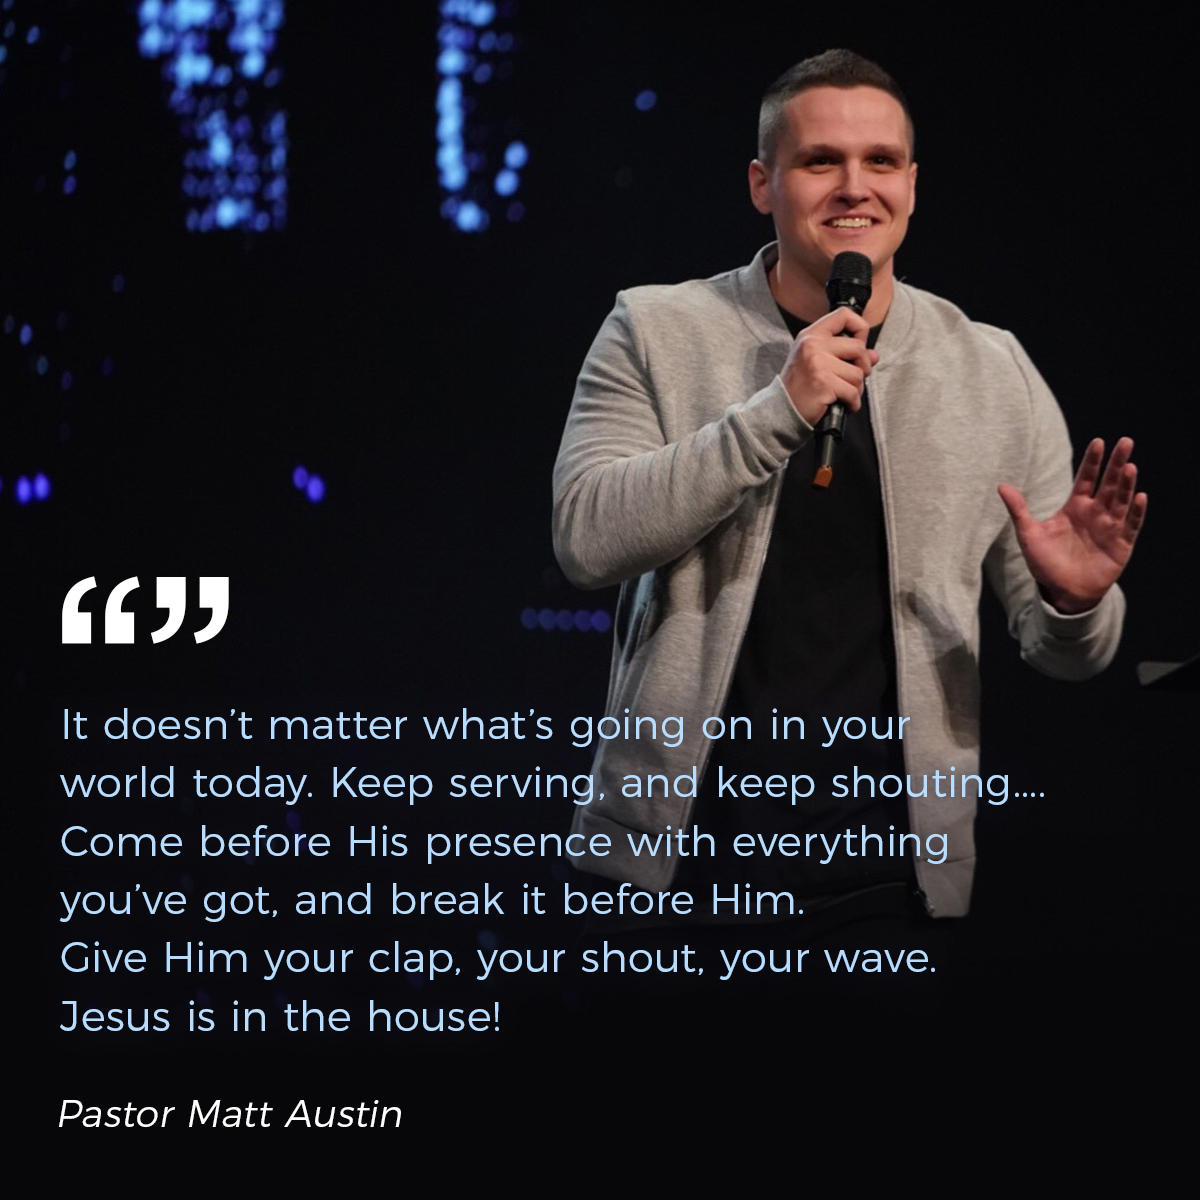 “It doesn’t matter what’s going on in your world today. Keep serving, and keep shouting.... Come before His presence with everything you’ve got, and break it before Him. Give Him your clap, your shout, your wave.  Jesus is in the house!” – Pastor Matt Austin